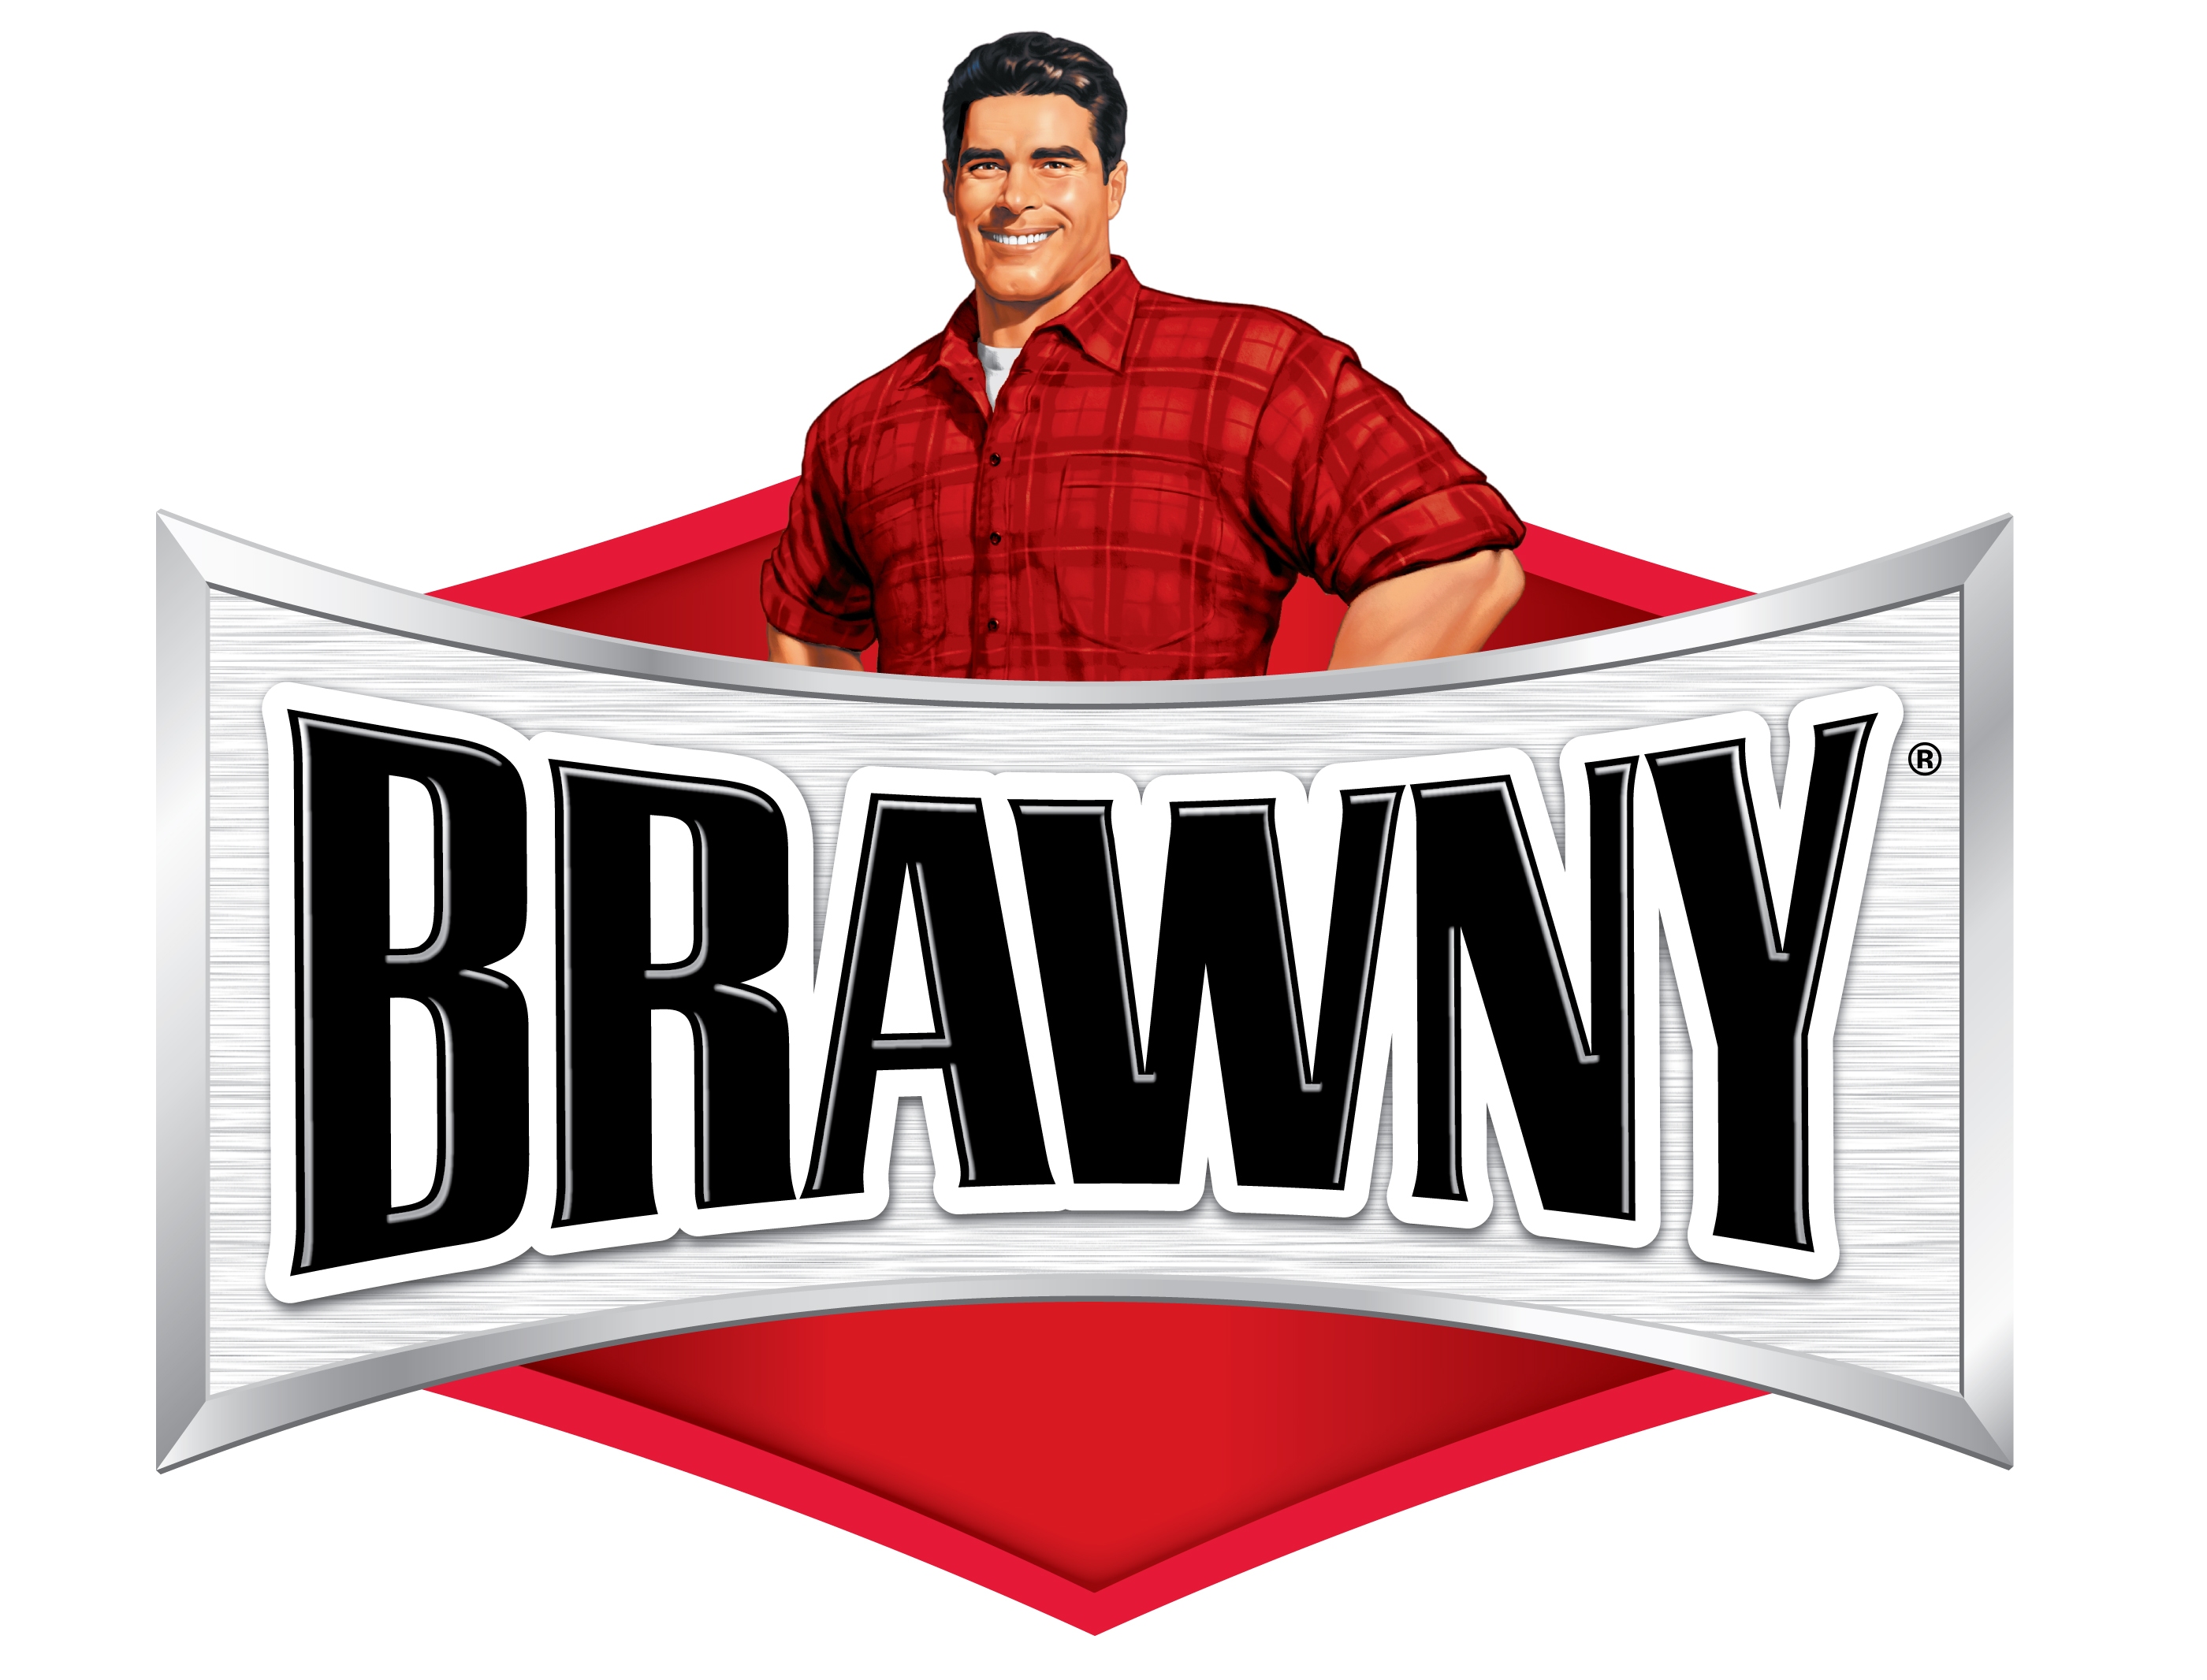 Brawny ® Partners With The Wounded Warrior Project ®.